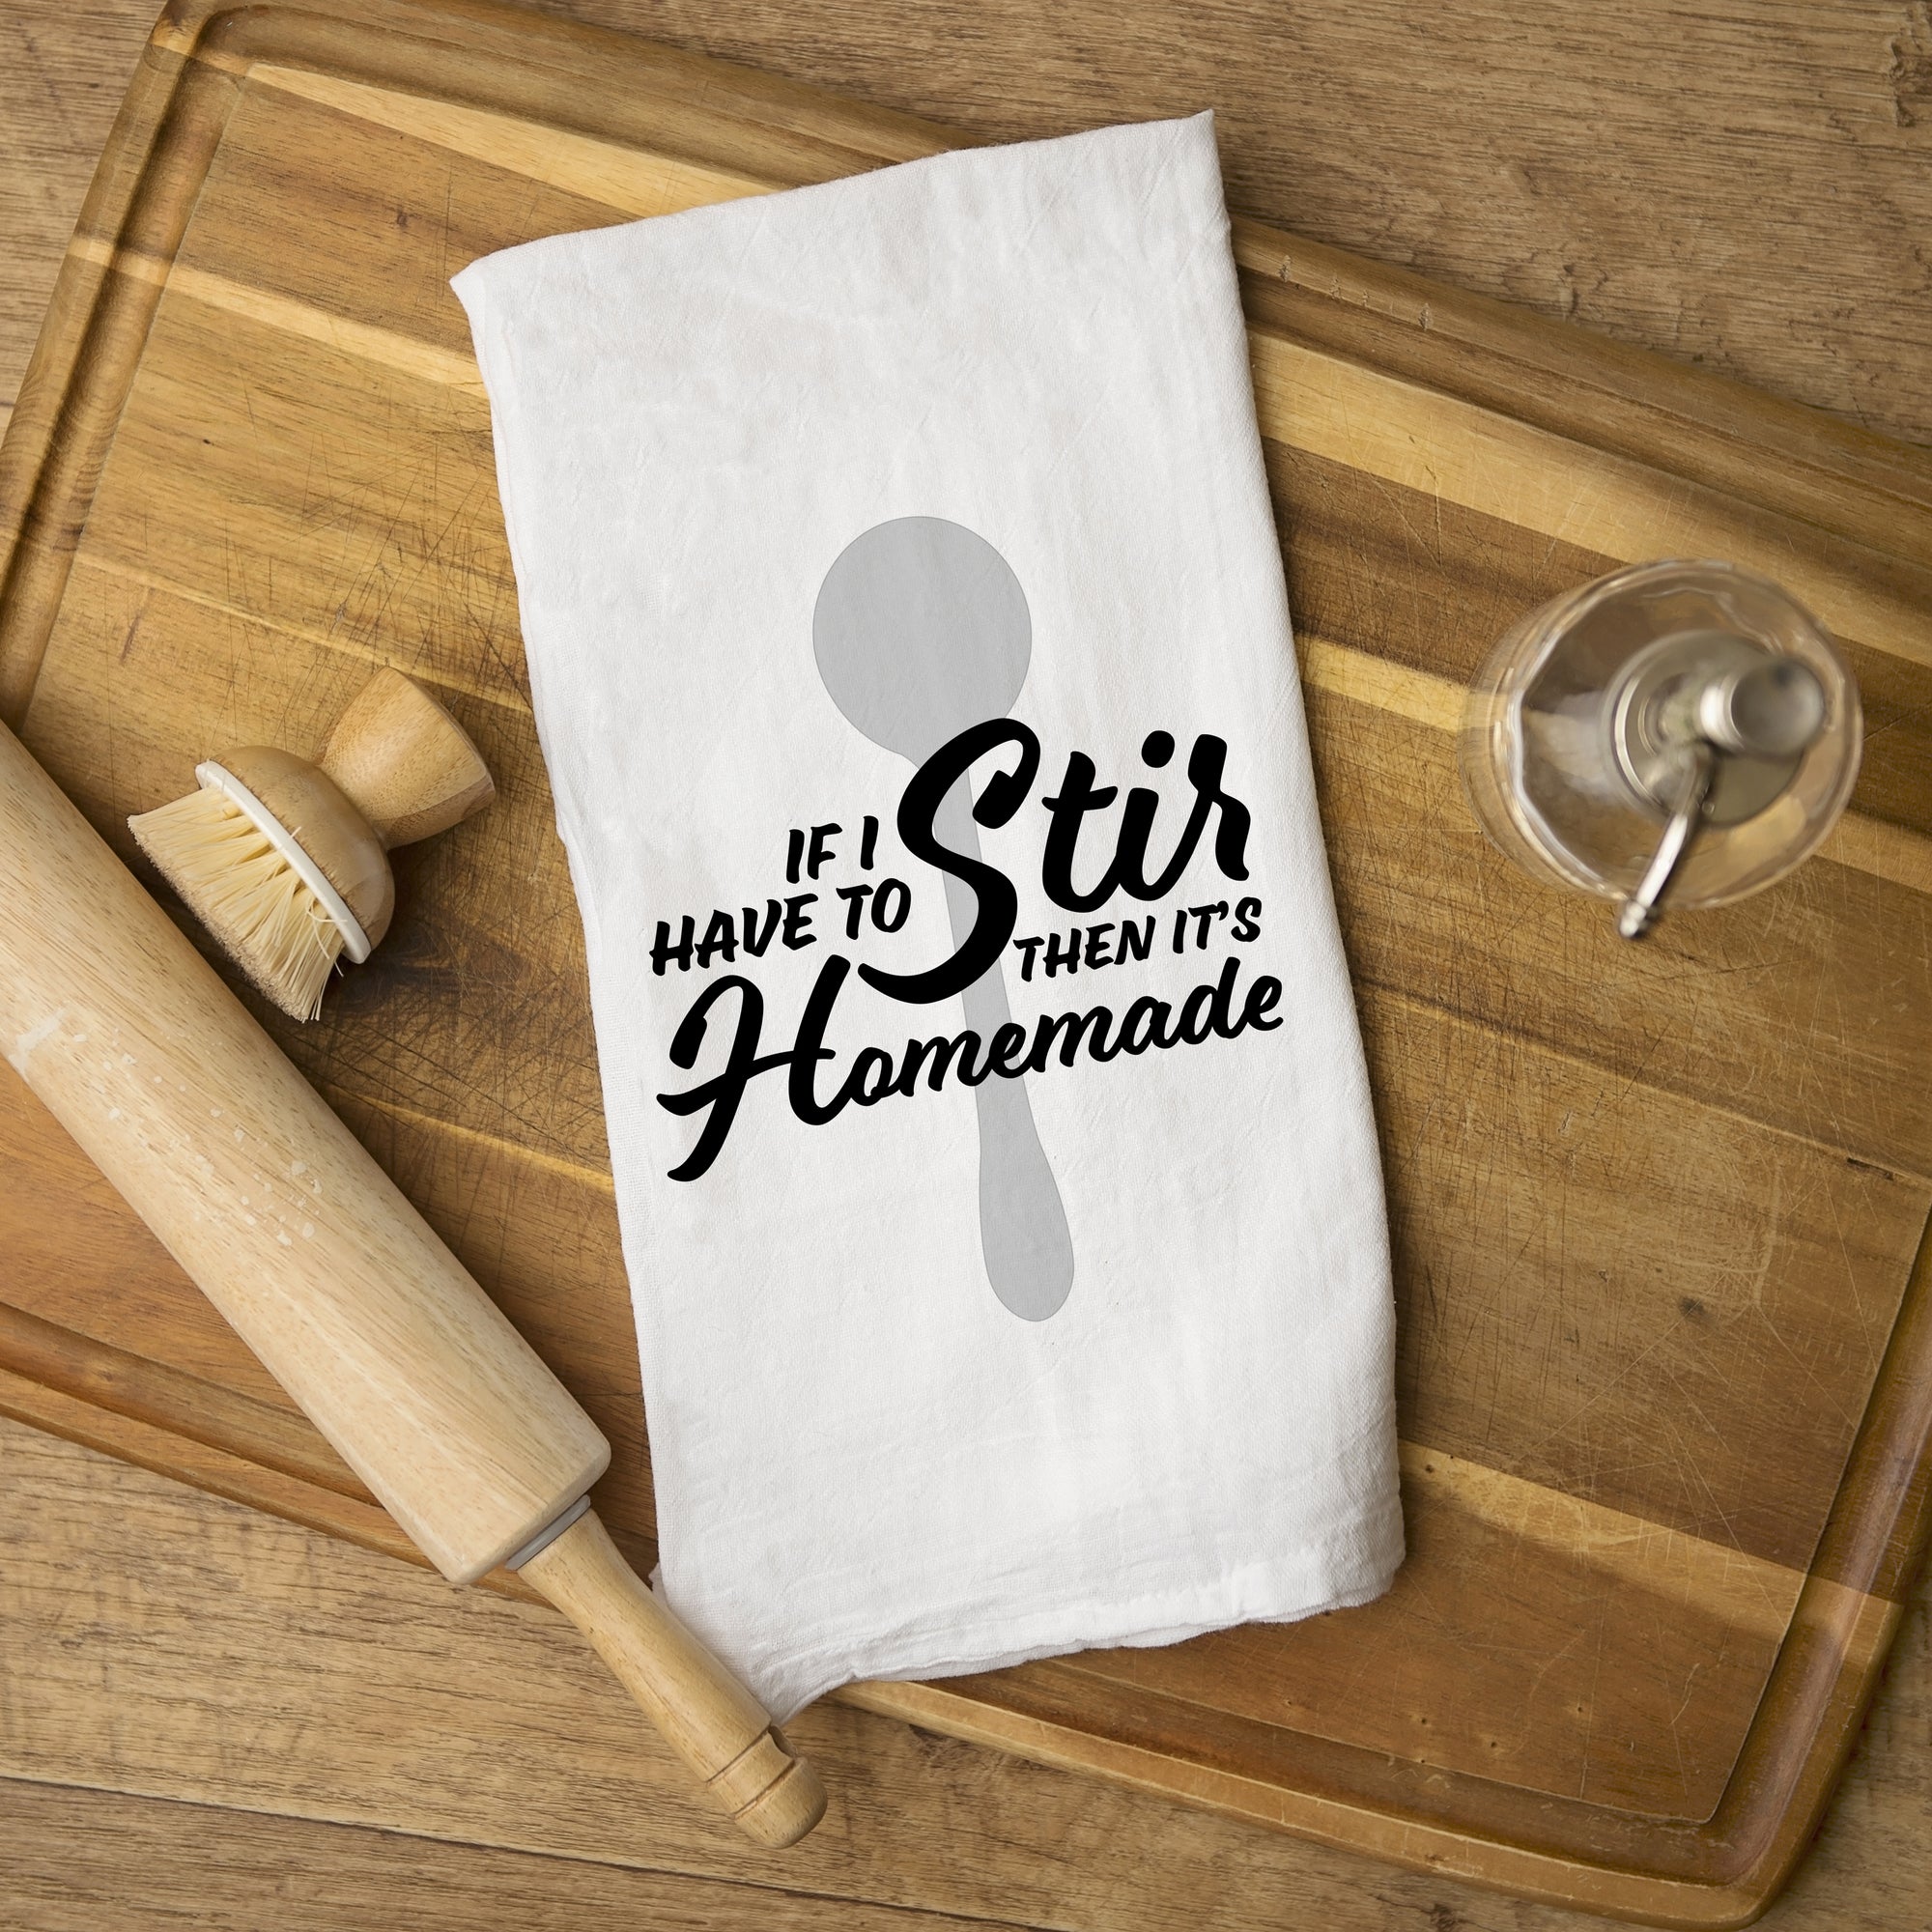 Tea Towel: "If I have to stir, it's homemade" cotton, Pipsy.com